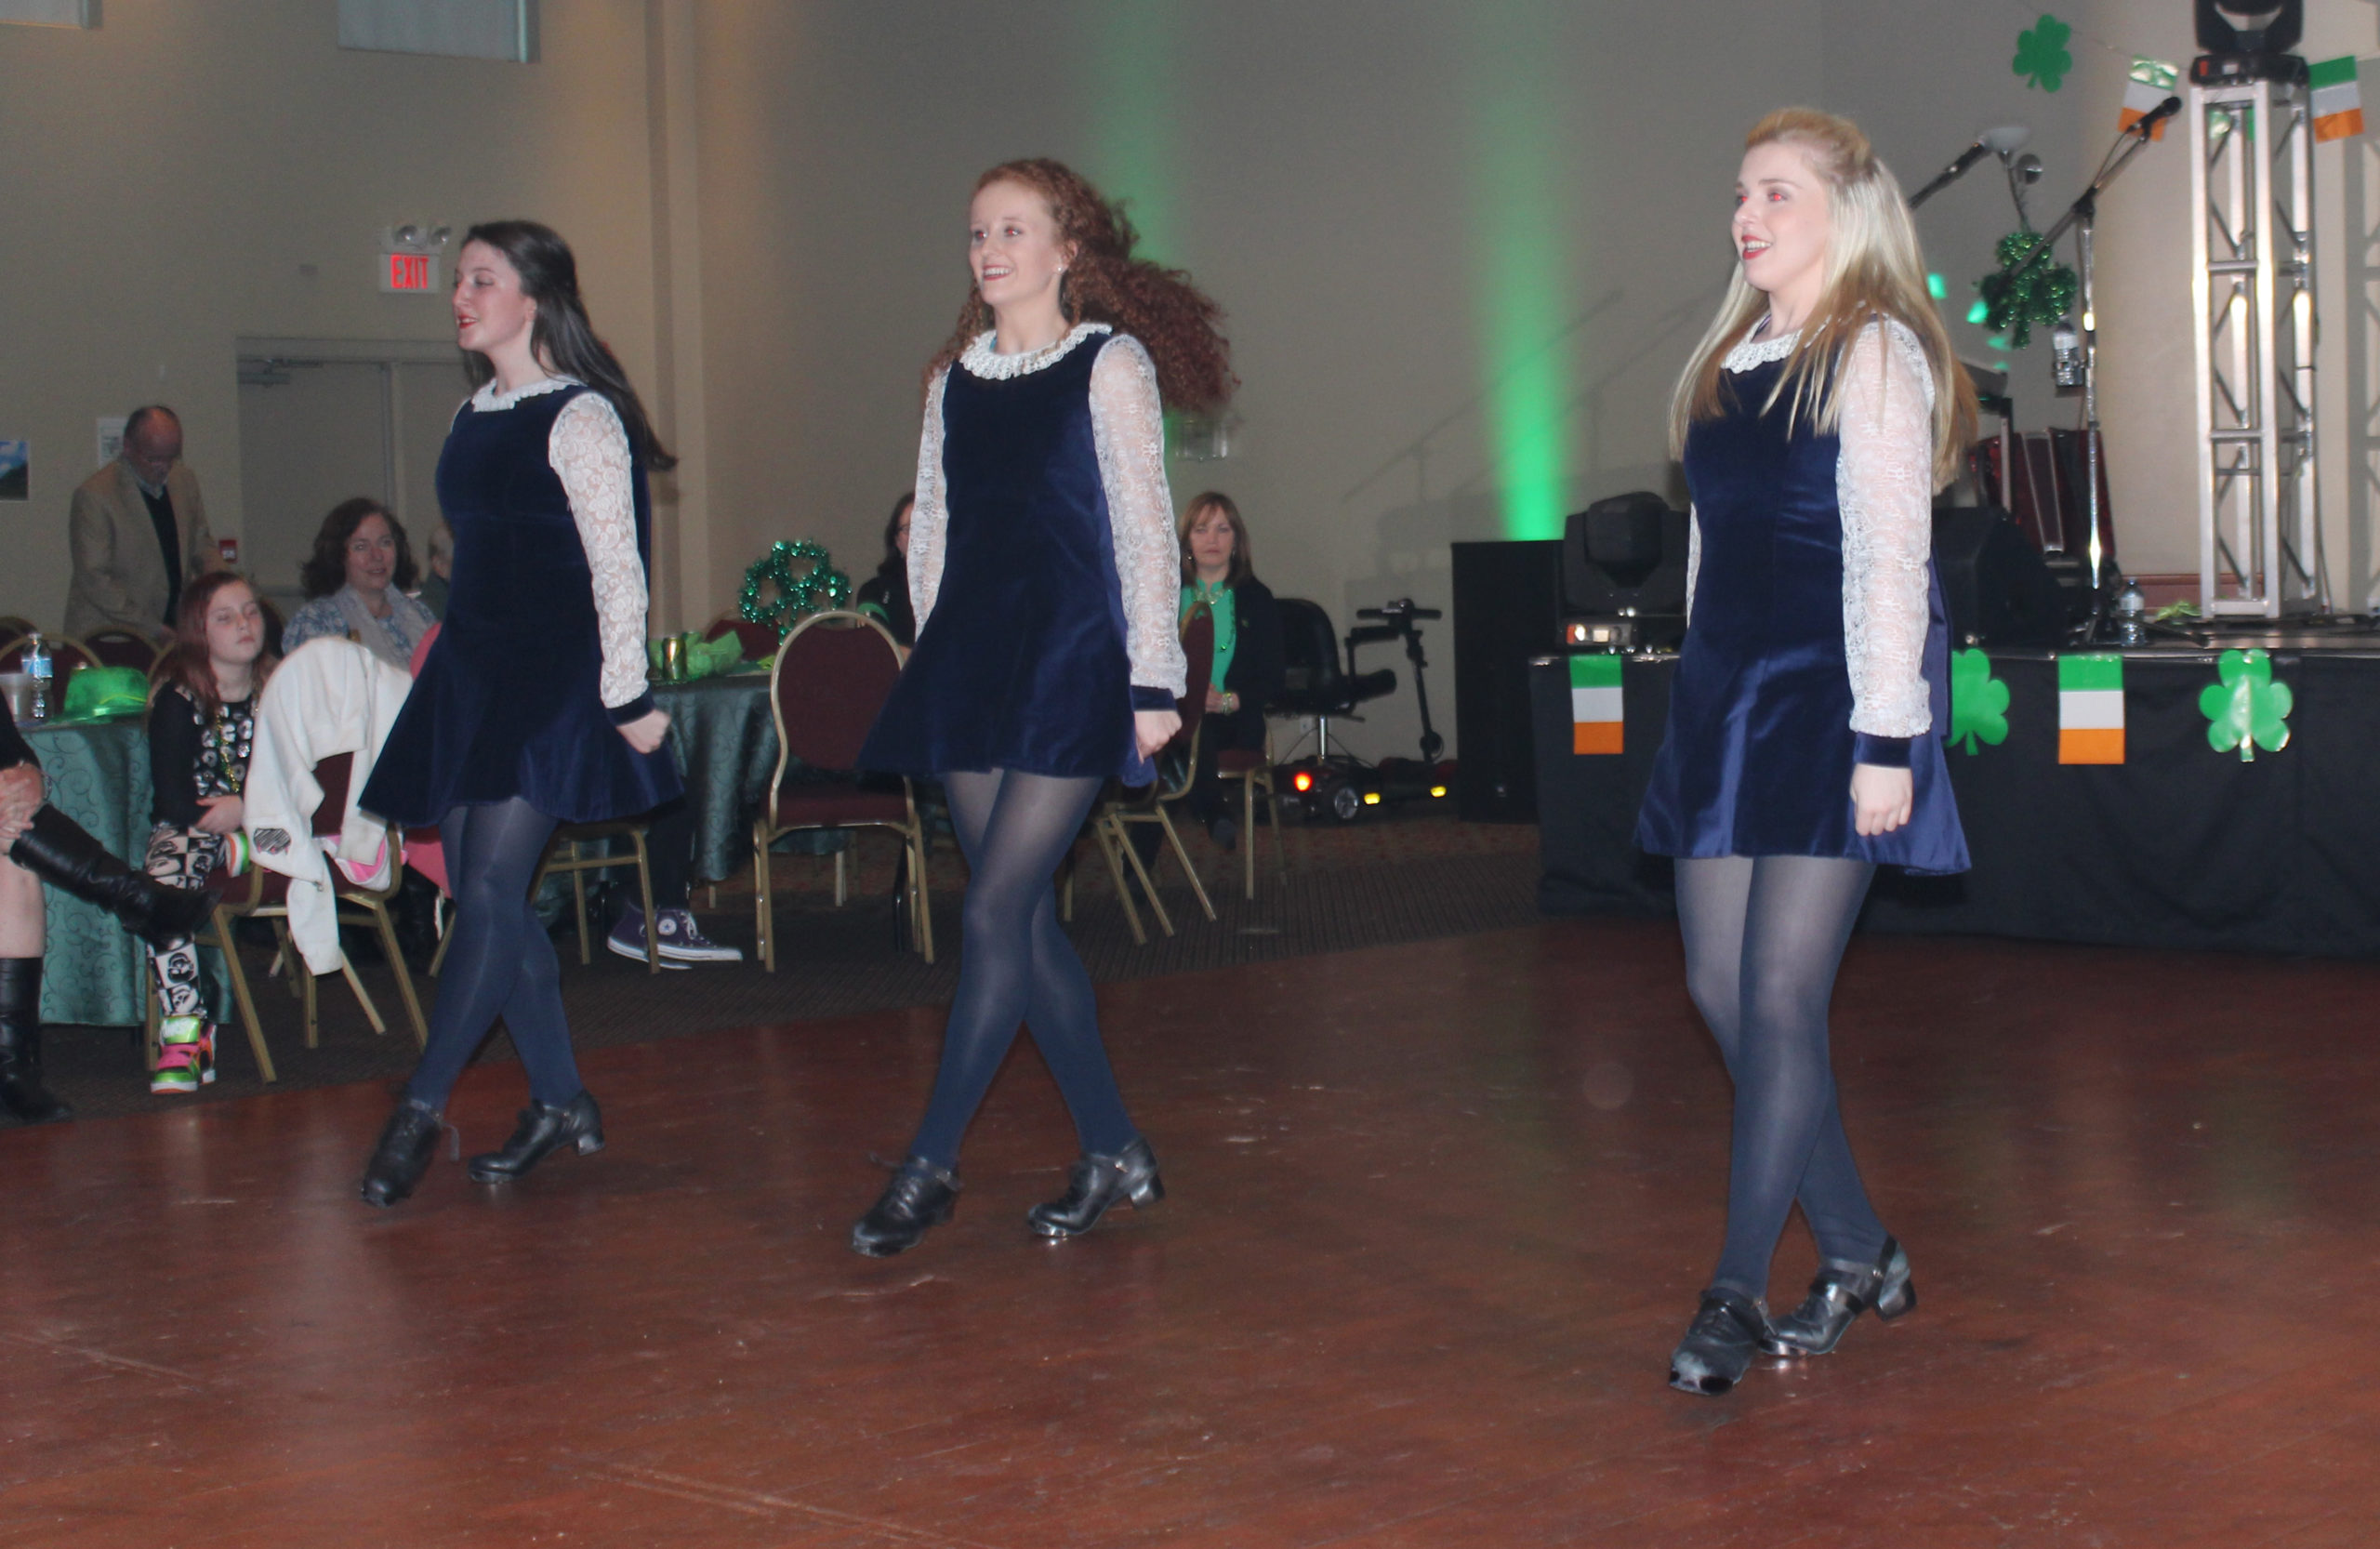 Irish dancers perform at the Banquet Hall in Oakville.